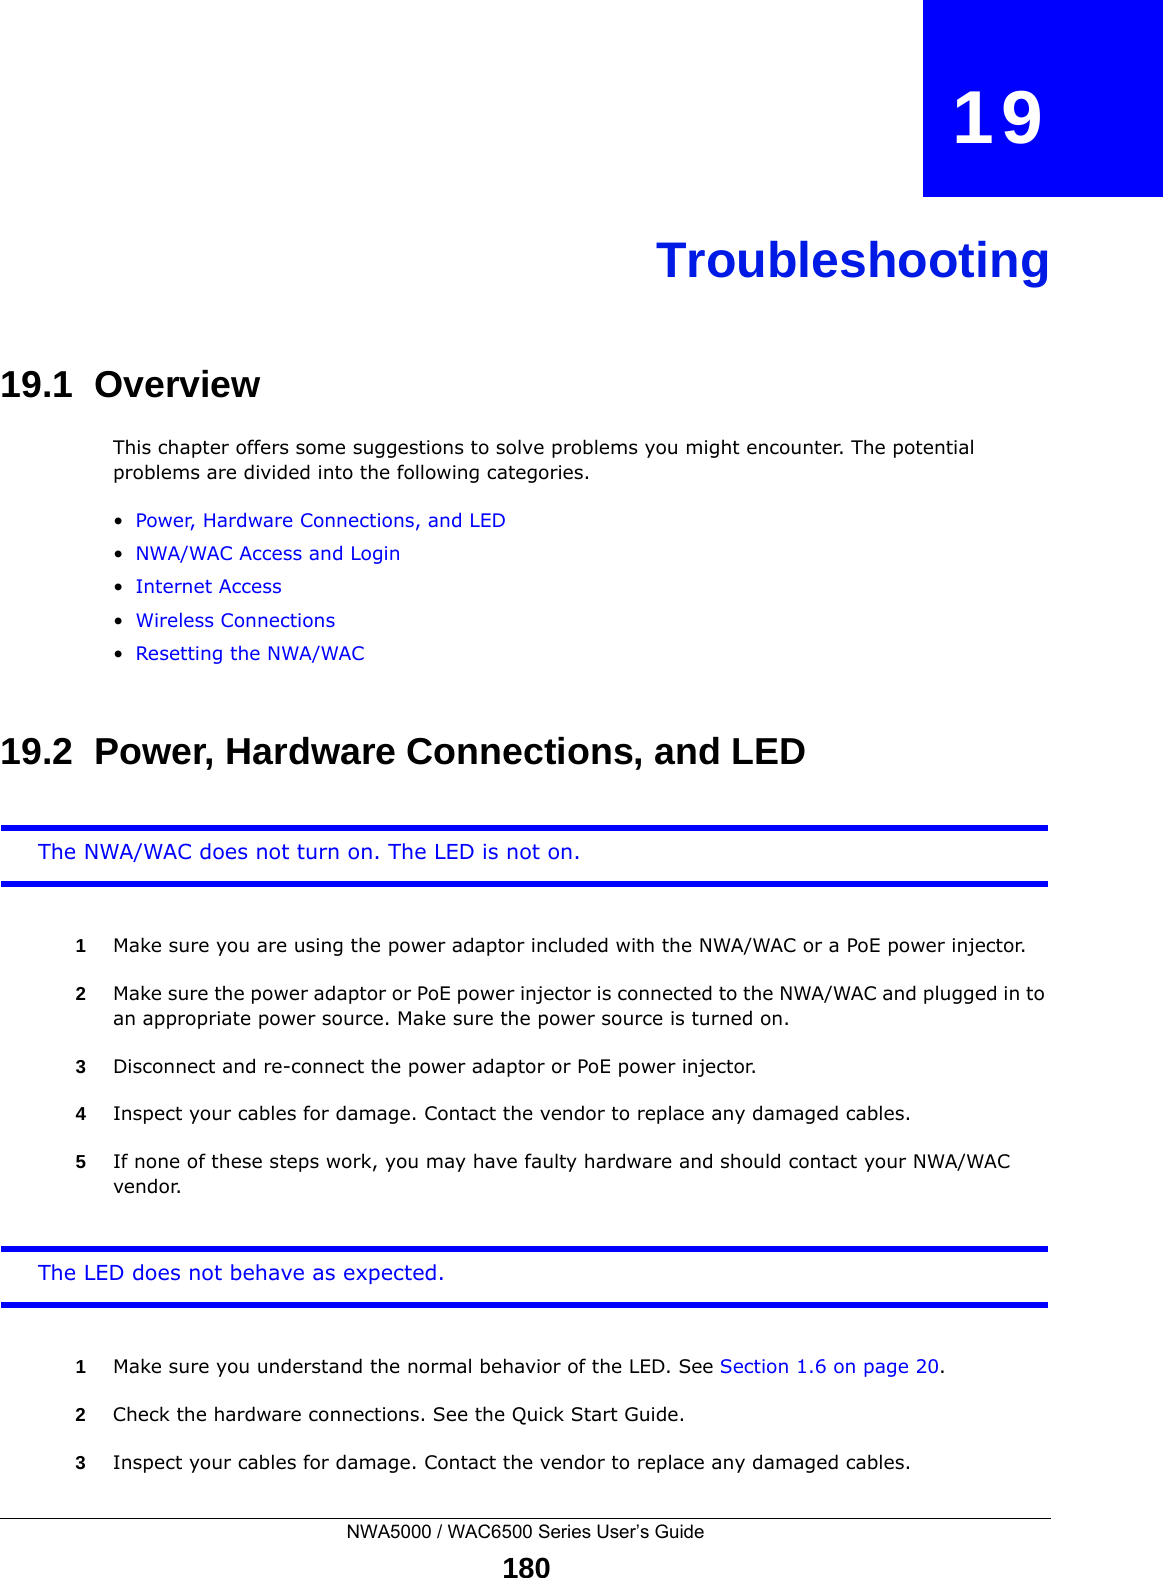 NWA5000 / WAC6500 Series User’s Guide180CHAPTER   19Troubleshooting19.1  OverviewThis chapter offers some suggestions to solve problems you might encounter. The potential problems are divided into the following categories.•Power, Hardware Connections, and LED•NWA/WAC Access and Login•Internet Access•Wireless Connections•Resetting the NWA/WAC19.2  Power, Hardware Connections, and LEDThe NWA/WAC does not turn on. The LED is not on.1Make sure you are using the power adaptor included with the NWA/WAC or a PoE power injector.2Make sure the power adaptor or PoE power injector is connected to the NWA/WAC and plugged in to an appropriate power source. Make sure the power source is turned on.3Disconnect and re-connect the power adaptor or PoE power injector.4Inspect your cables for damage. Contact the vendor to replace any damaged cables.5If none of these steps work, you may have faulty hardware and should contact your NWA/WAC vendor. The LED does not behave as expected.1Make sure you understand the normal behavior of the LED. See Section 1.6 on page 20.2Check the hardware connections. See the Quick Start Guide.3Inspect your cables for damage. Contact the vendor to replace any damaged cables.